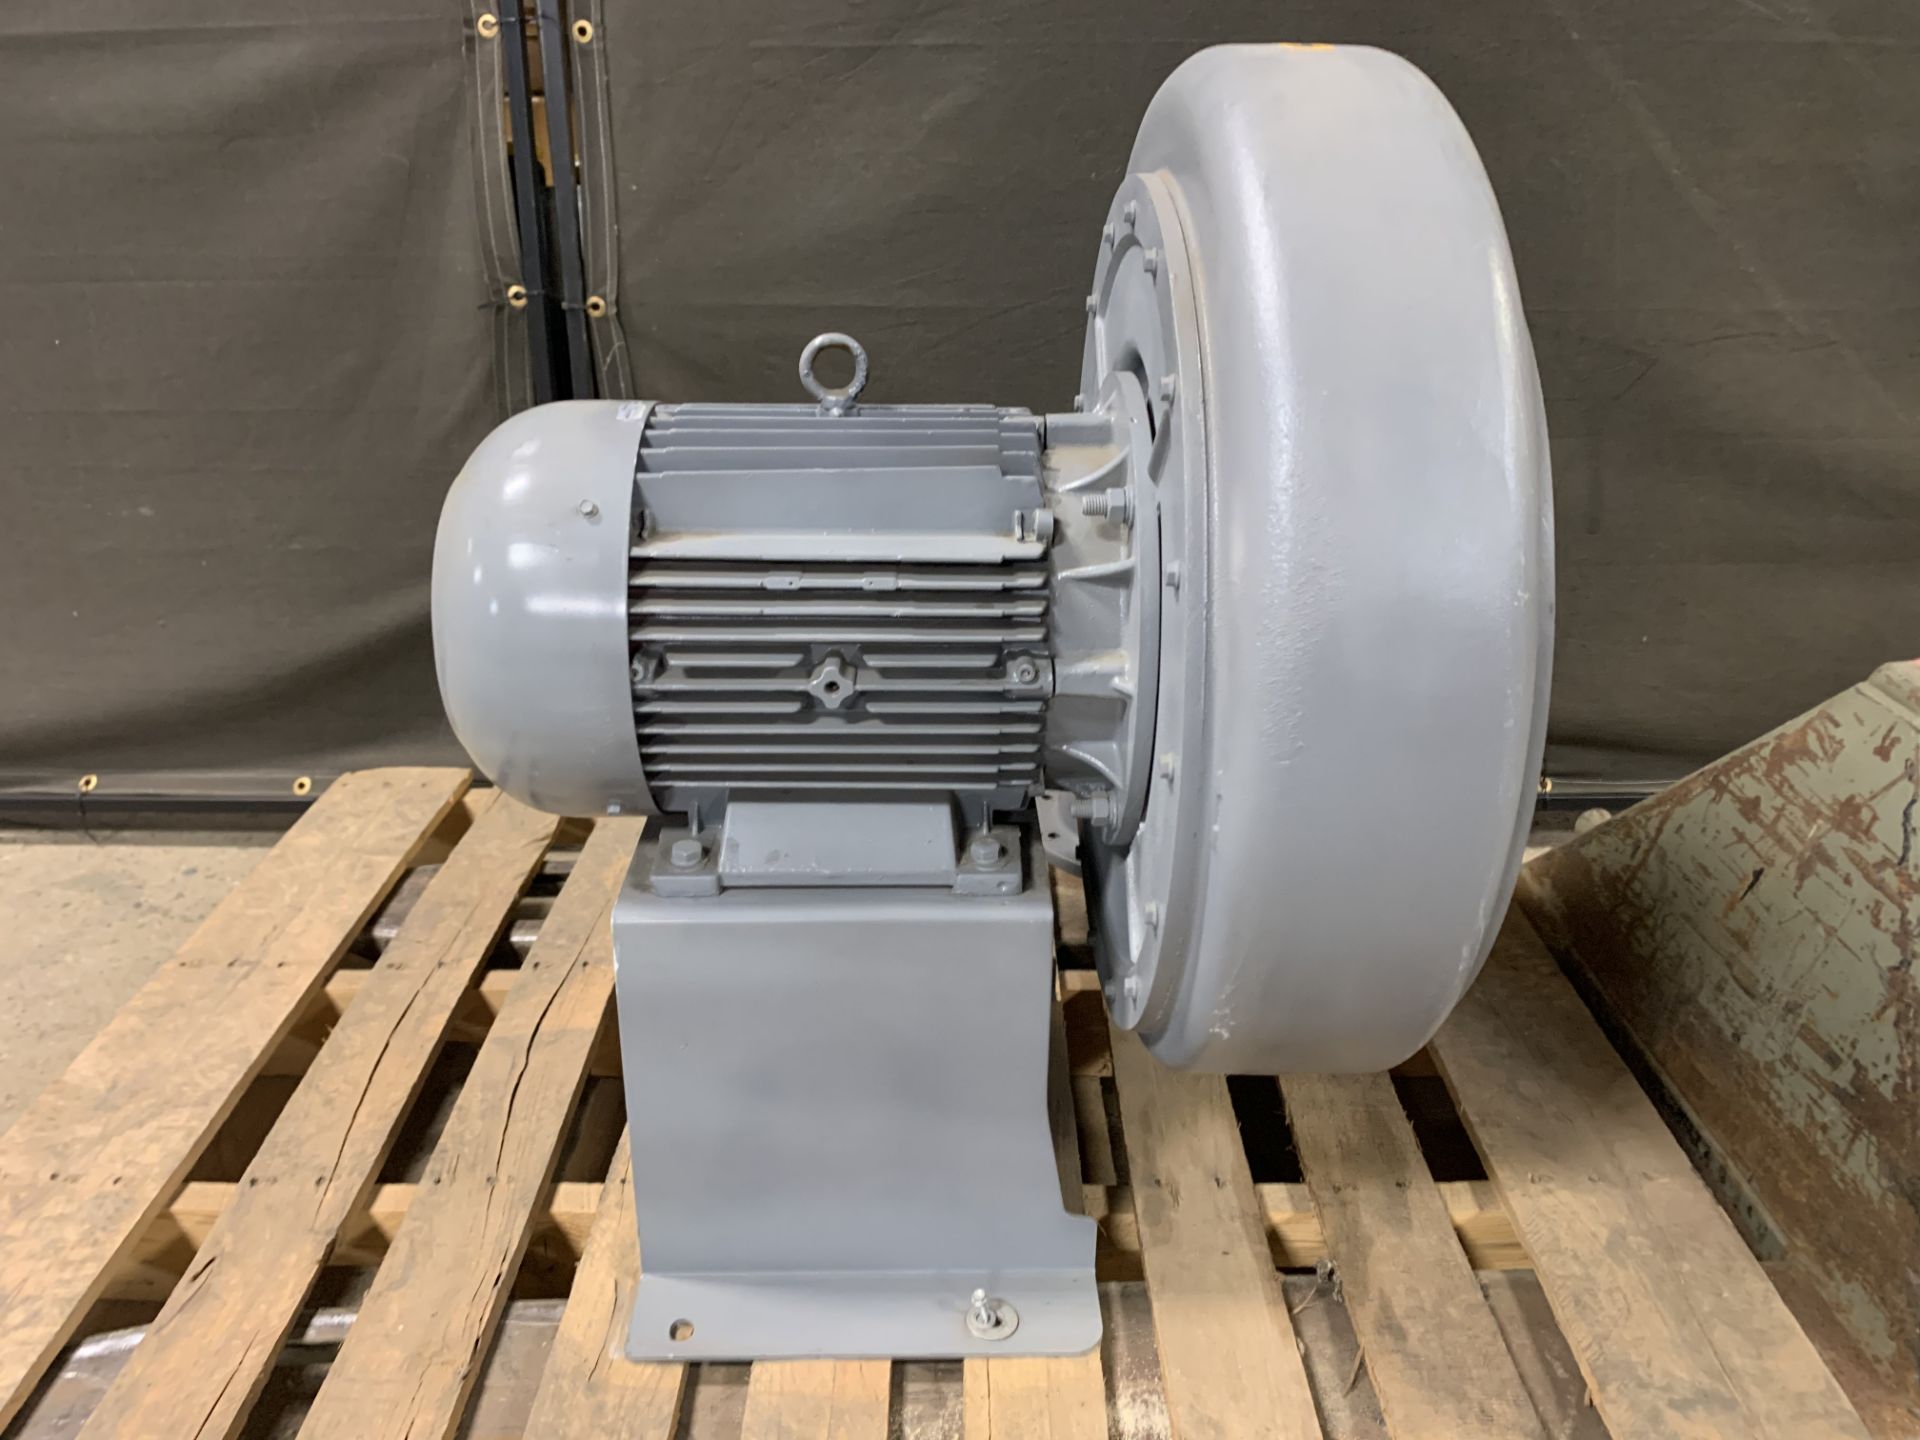 REFURBISHED - HRD 7 FU-105/20,0, SERIES HRD RADIAL HIGH PRESSURE BLOWER WITH FREQUENCY CONVERTER - Image 7 of 8